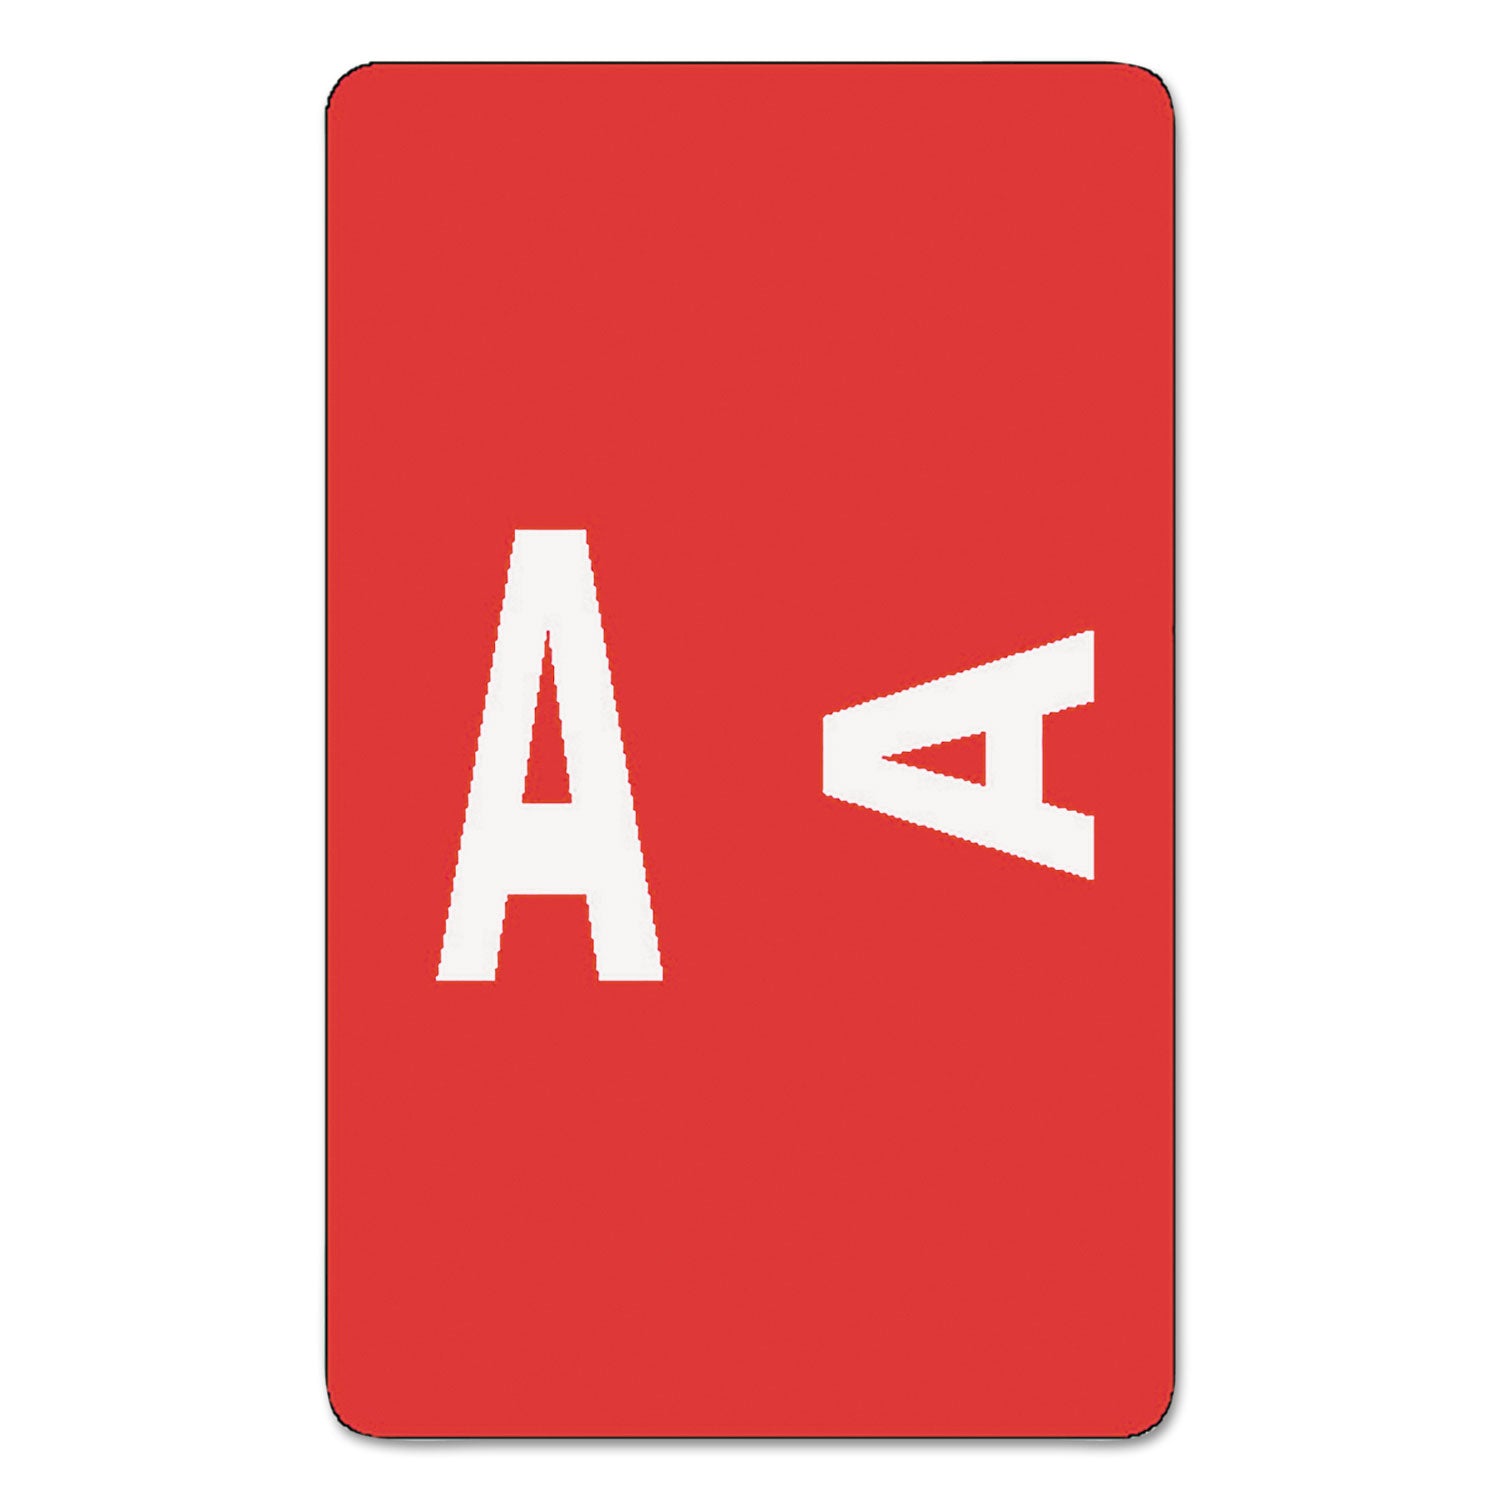 AlphaZ Color-Coded Second Letter Alphabetical Labels, A, 1 x 1.63, Red, 10/Sheet, 10 Sheets/Pack - 